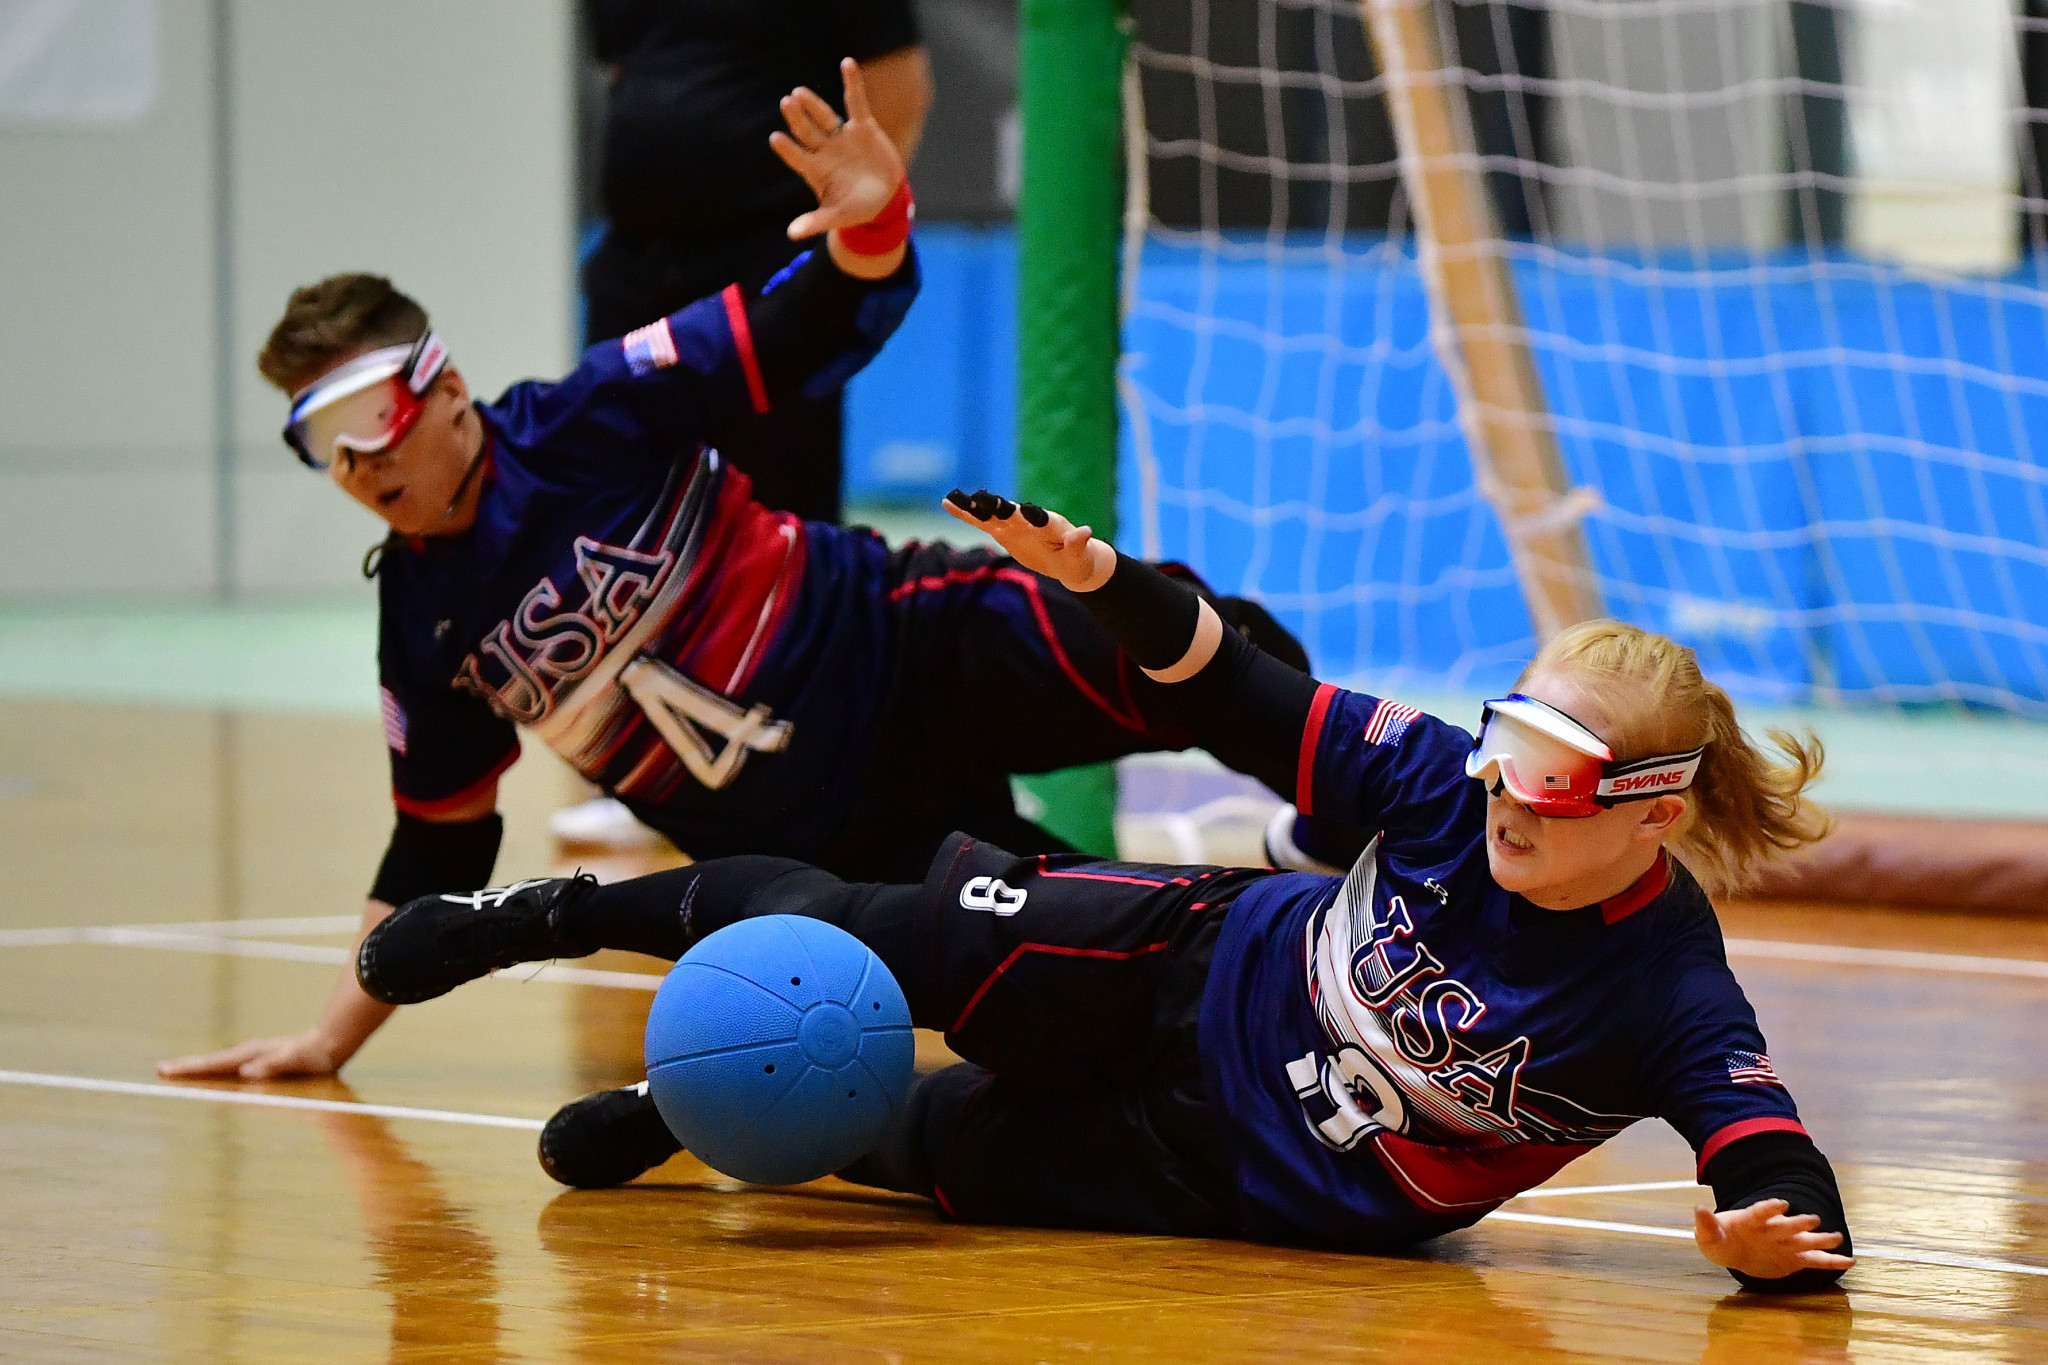 Goalball players will need to adhere to a new set of measures to combat the spread of COVID-19 if the sport is to safely return amid the pandemic ©Getty Images 